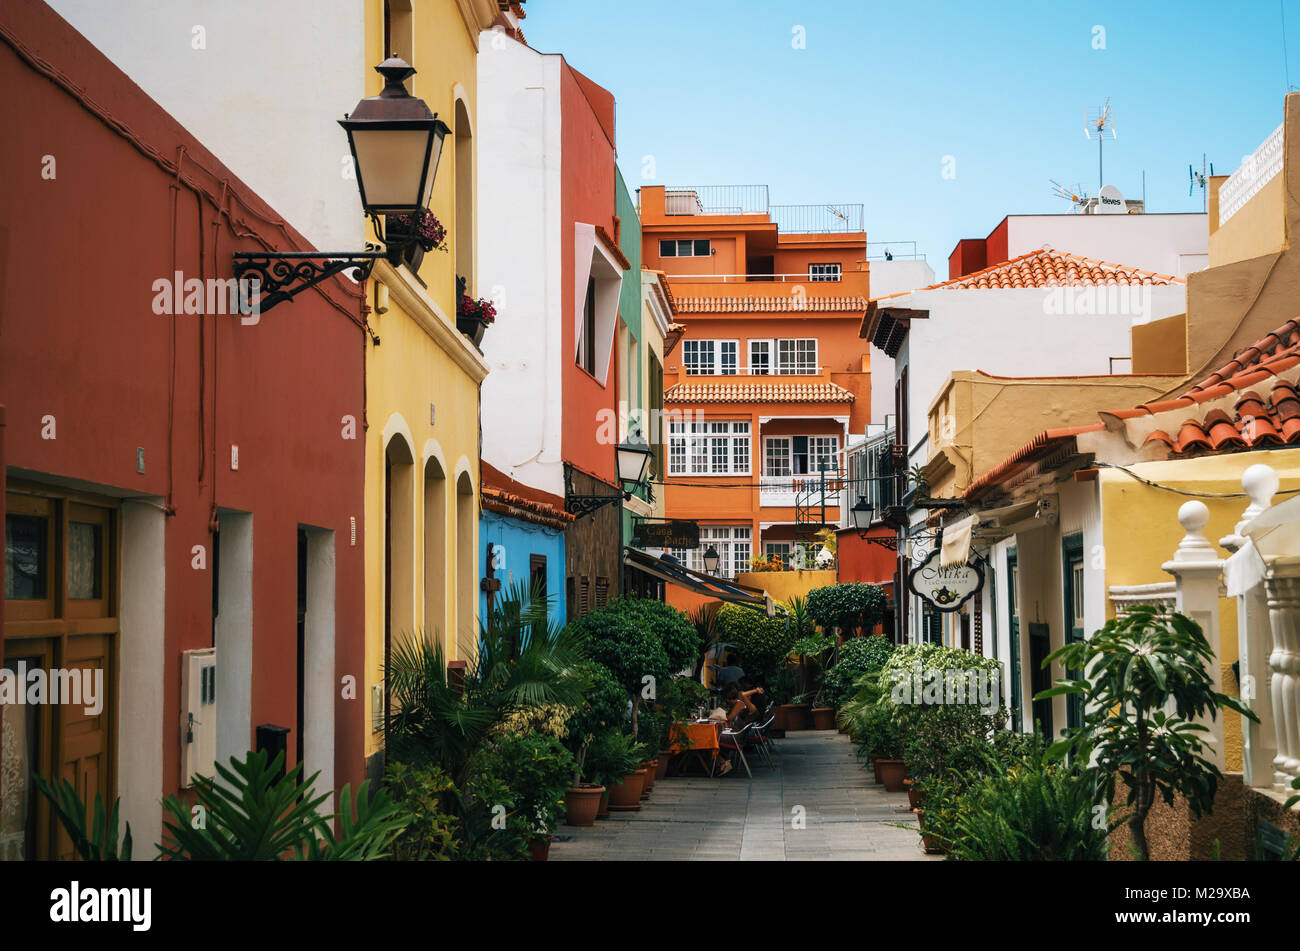 Puerto de la Cruz, Tenerife, Canary Islands - May 30, 2017: Narrow street in town with colorful retro houses, cafes and greenery,Tenerife island, Cana Stock Photo